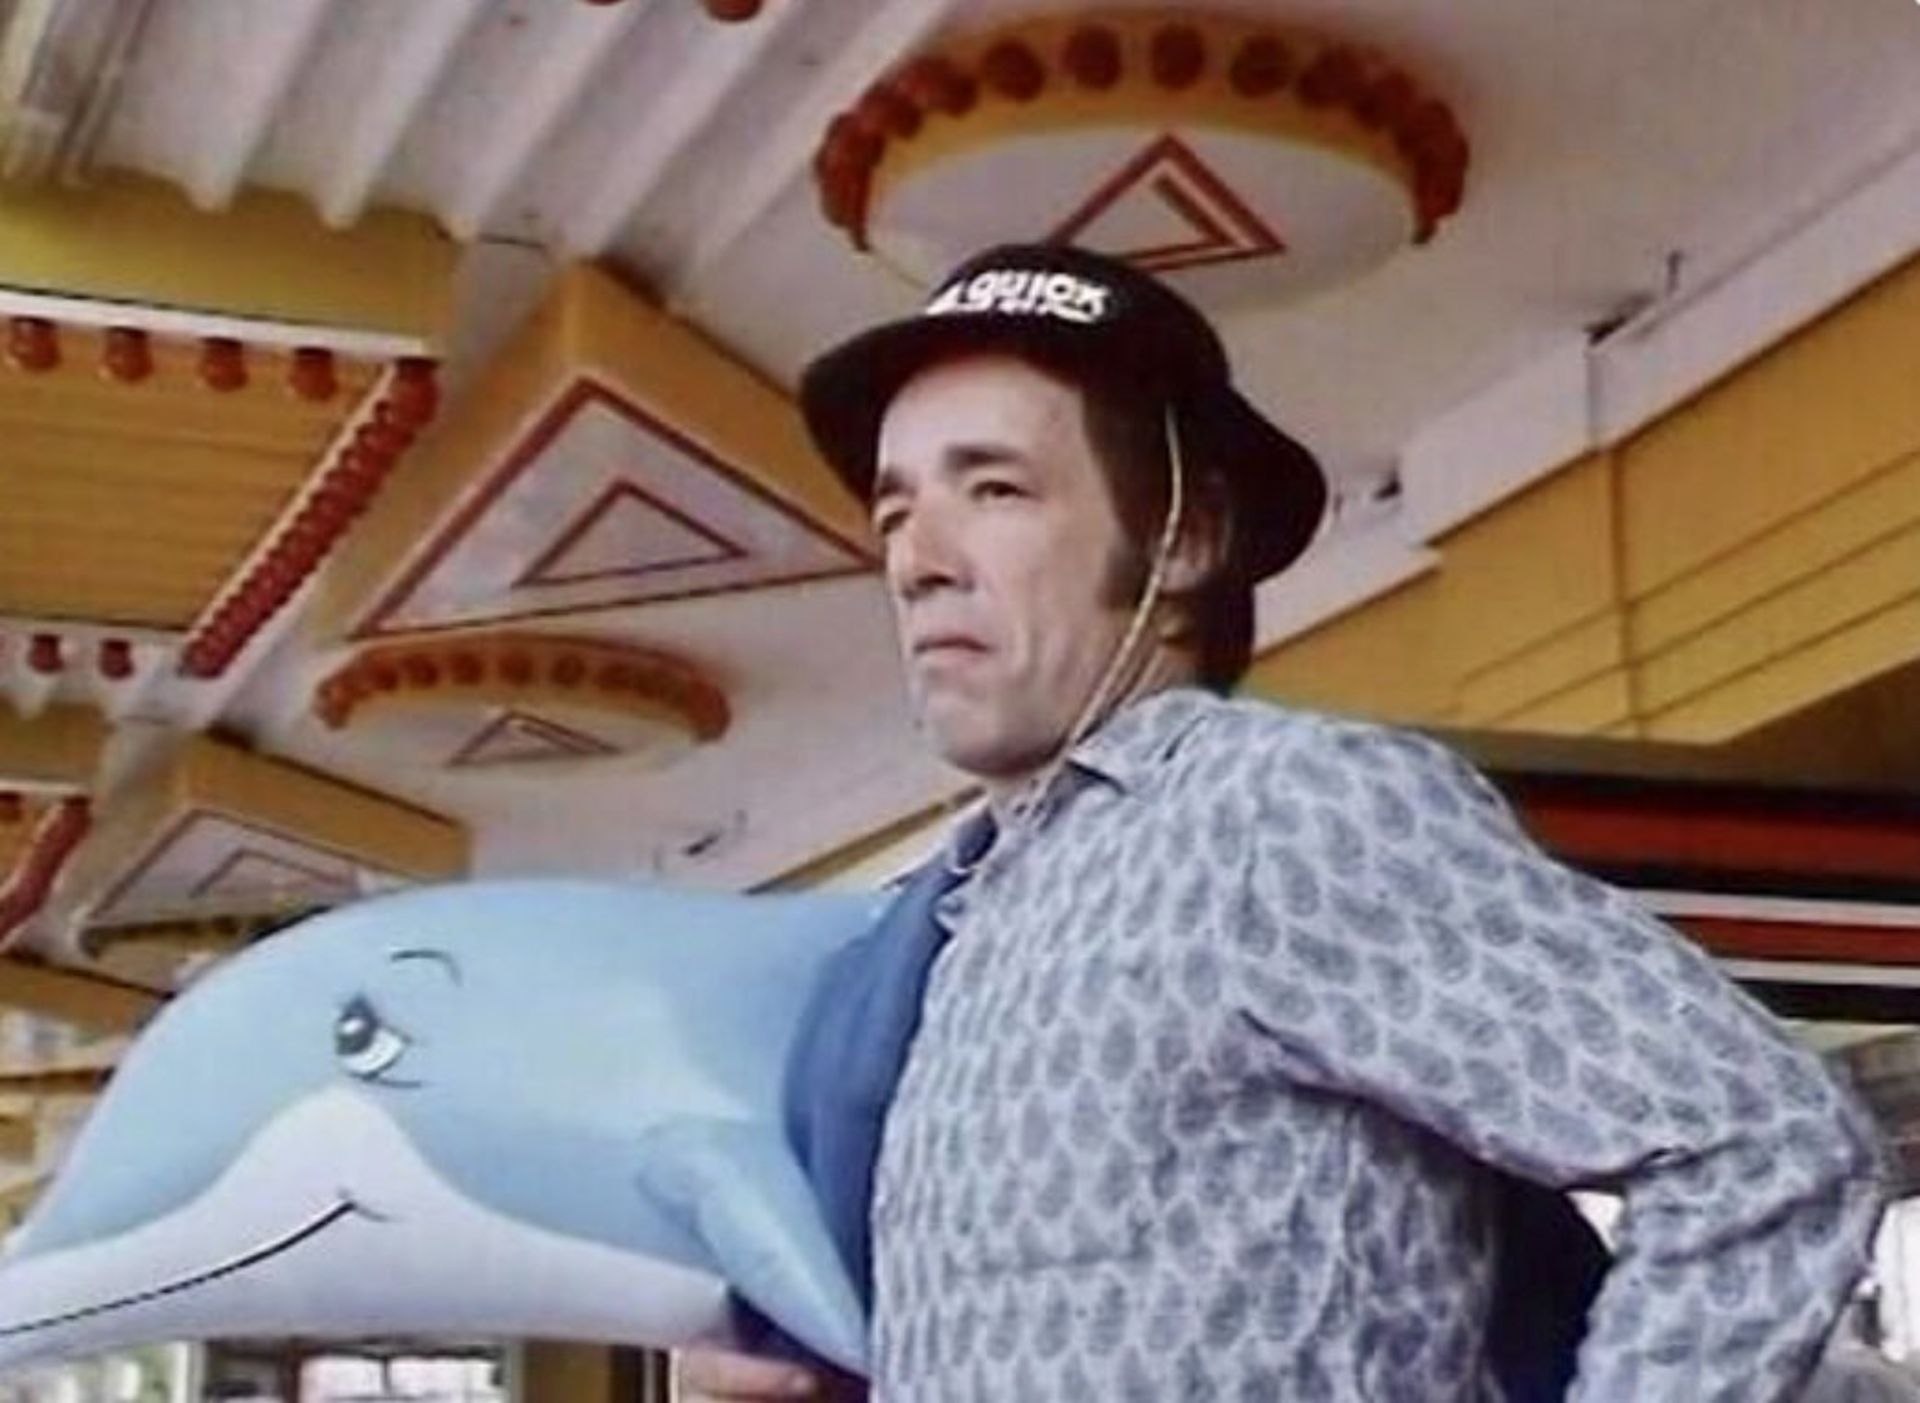 ONLY FOOLS & HORSES - TRIGGER'S DOLPHIN - JOLLY BOYS OUTING - Image 9 of 9